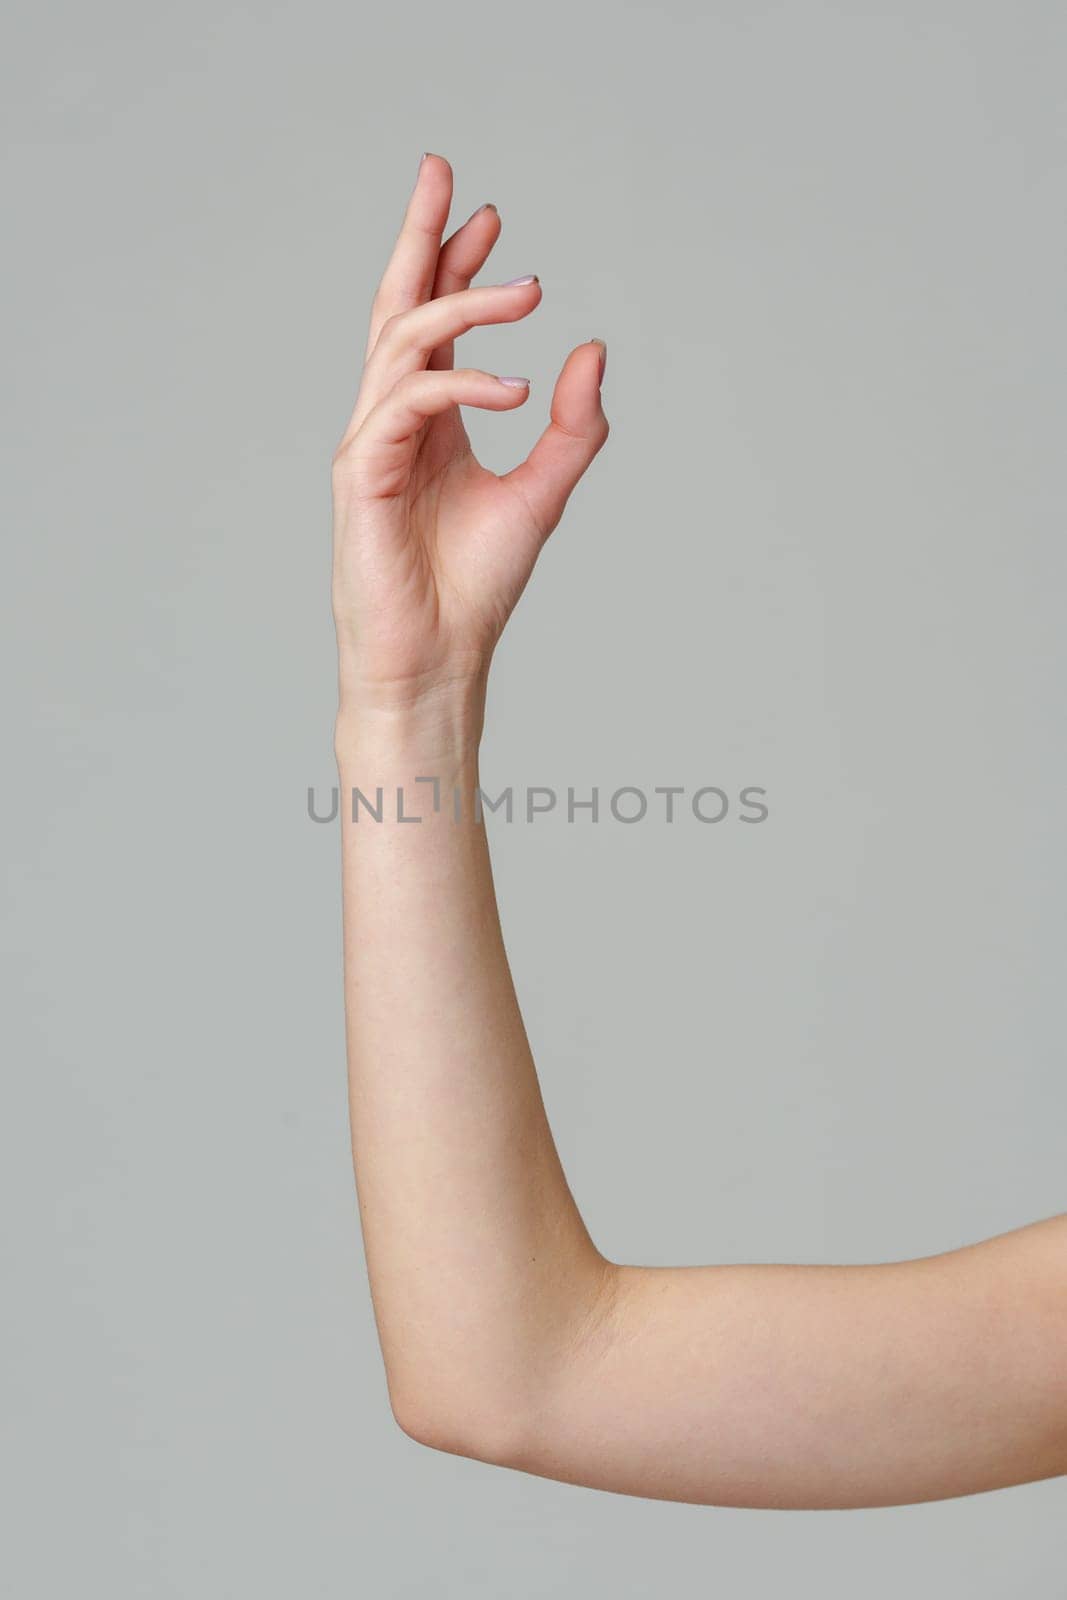 Female hand sign against gray background in studio by Fabrikasimf